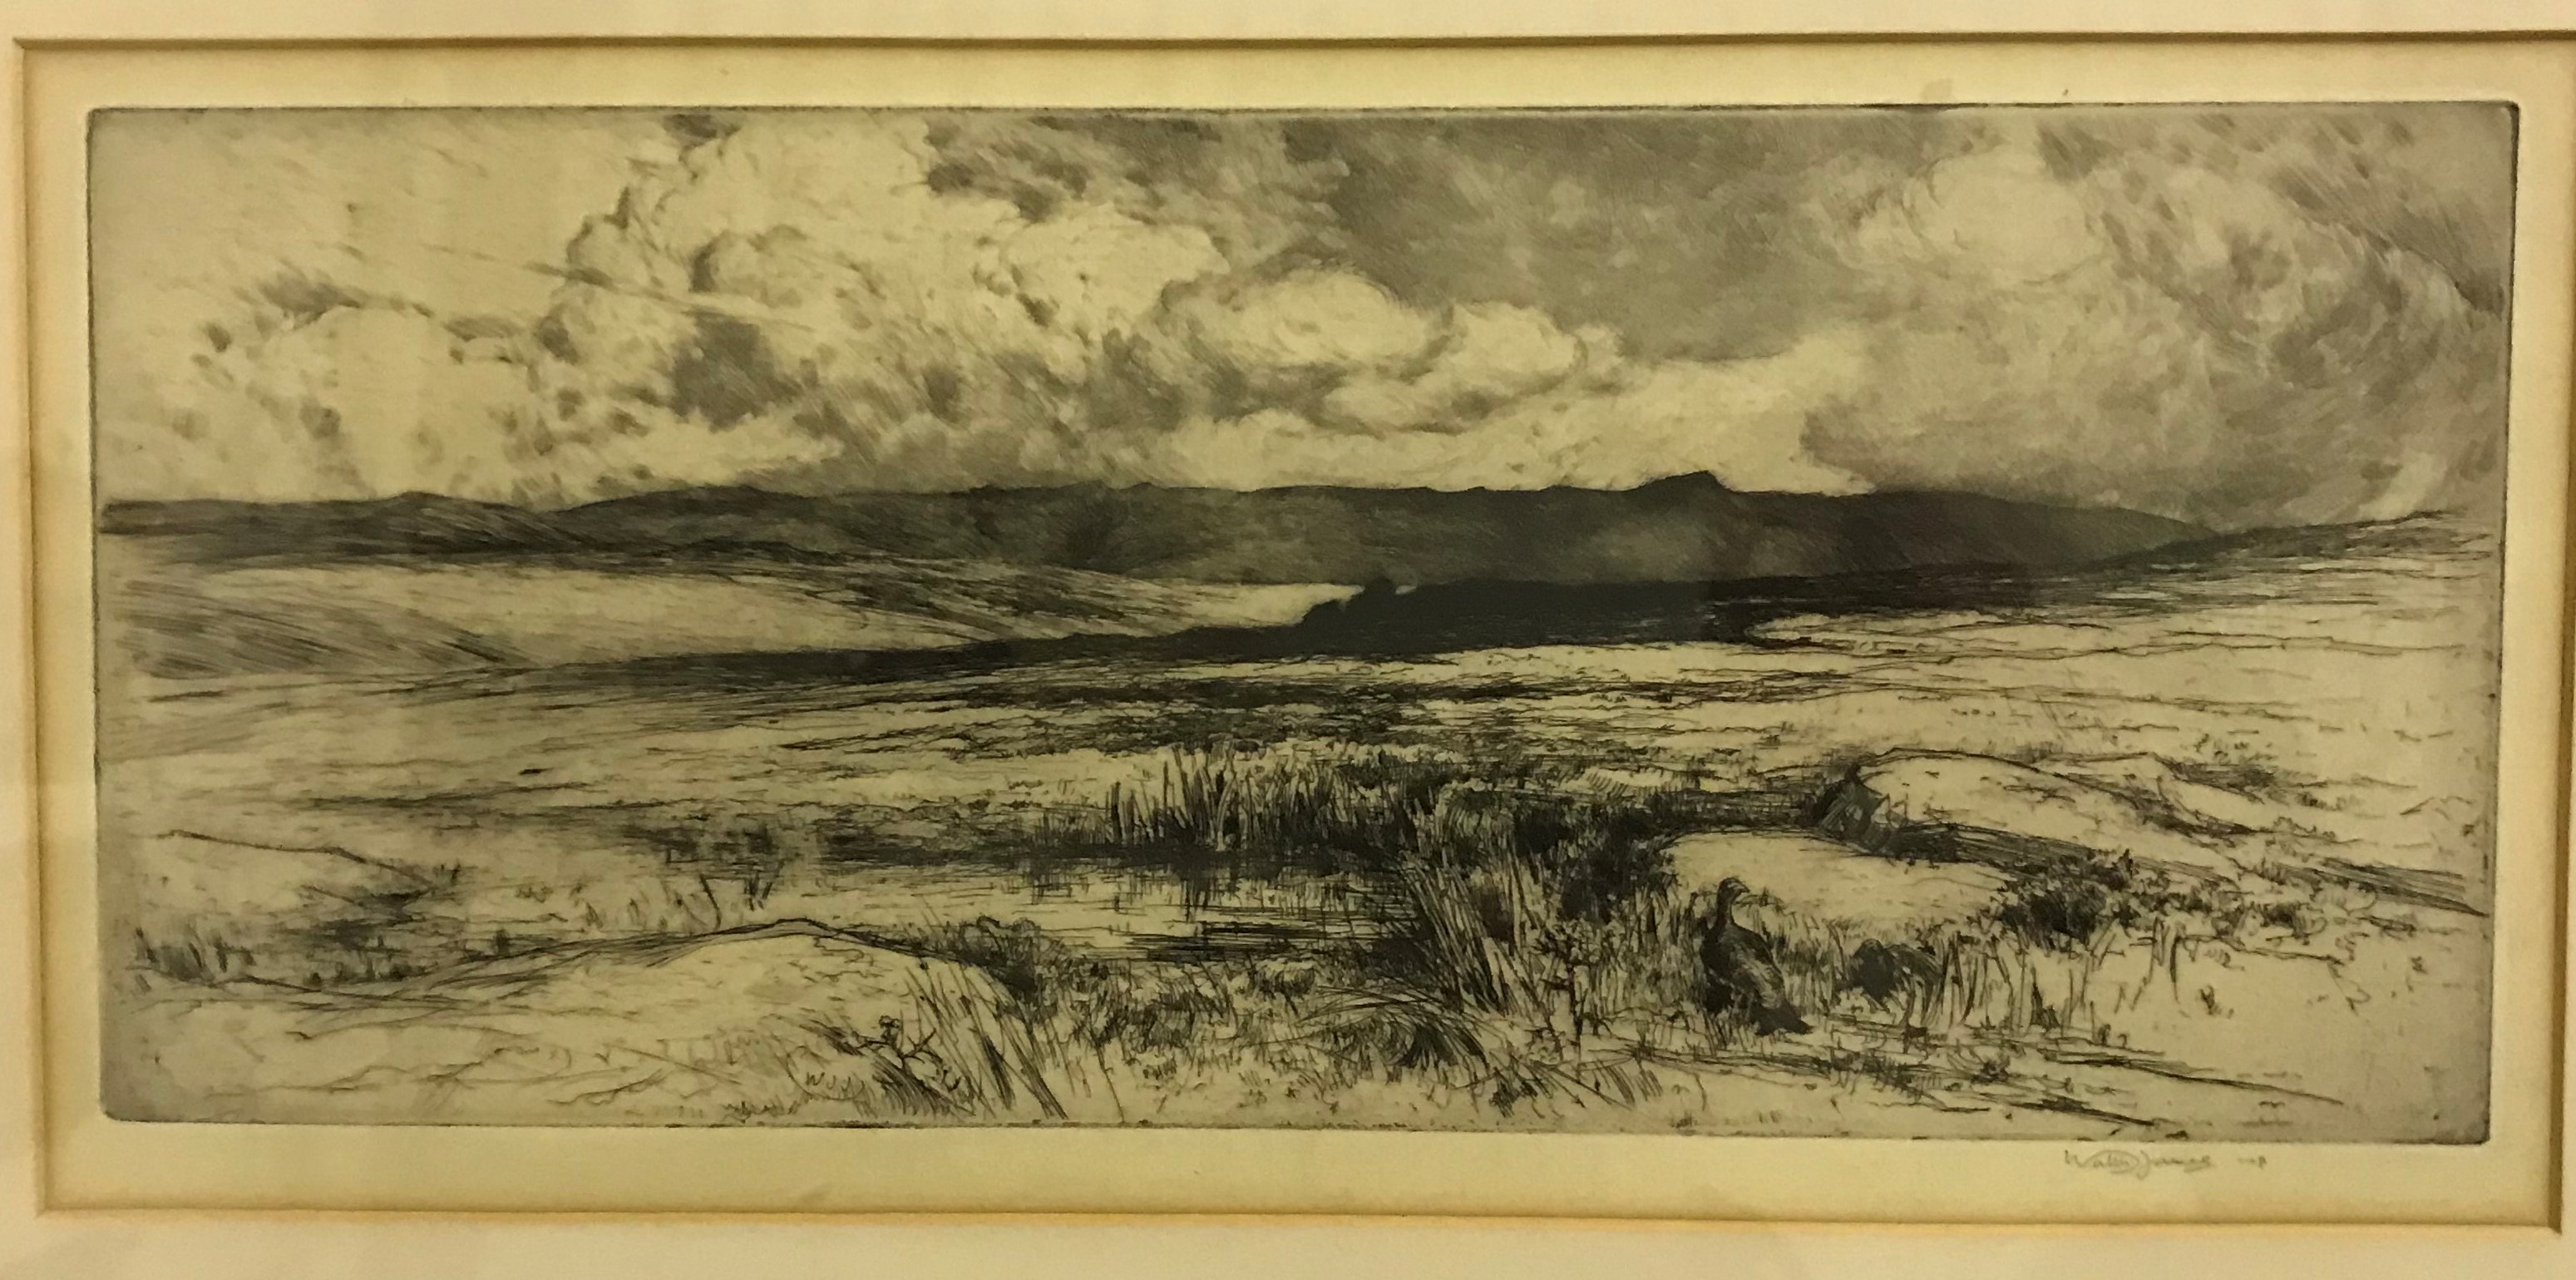 AFTER WALLIS JAMES "Moorland landscape with grouse in foreground", black and white etching,